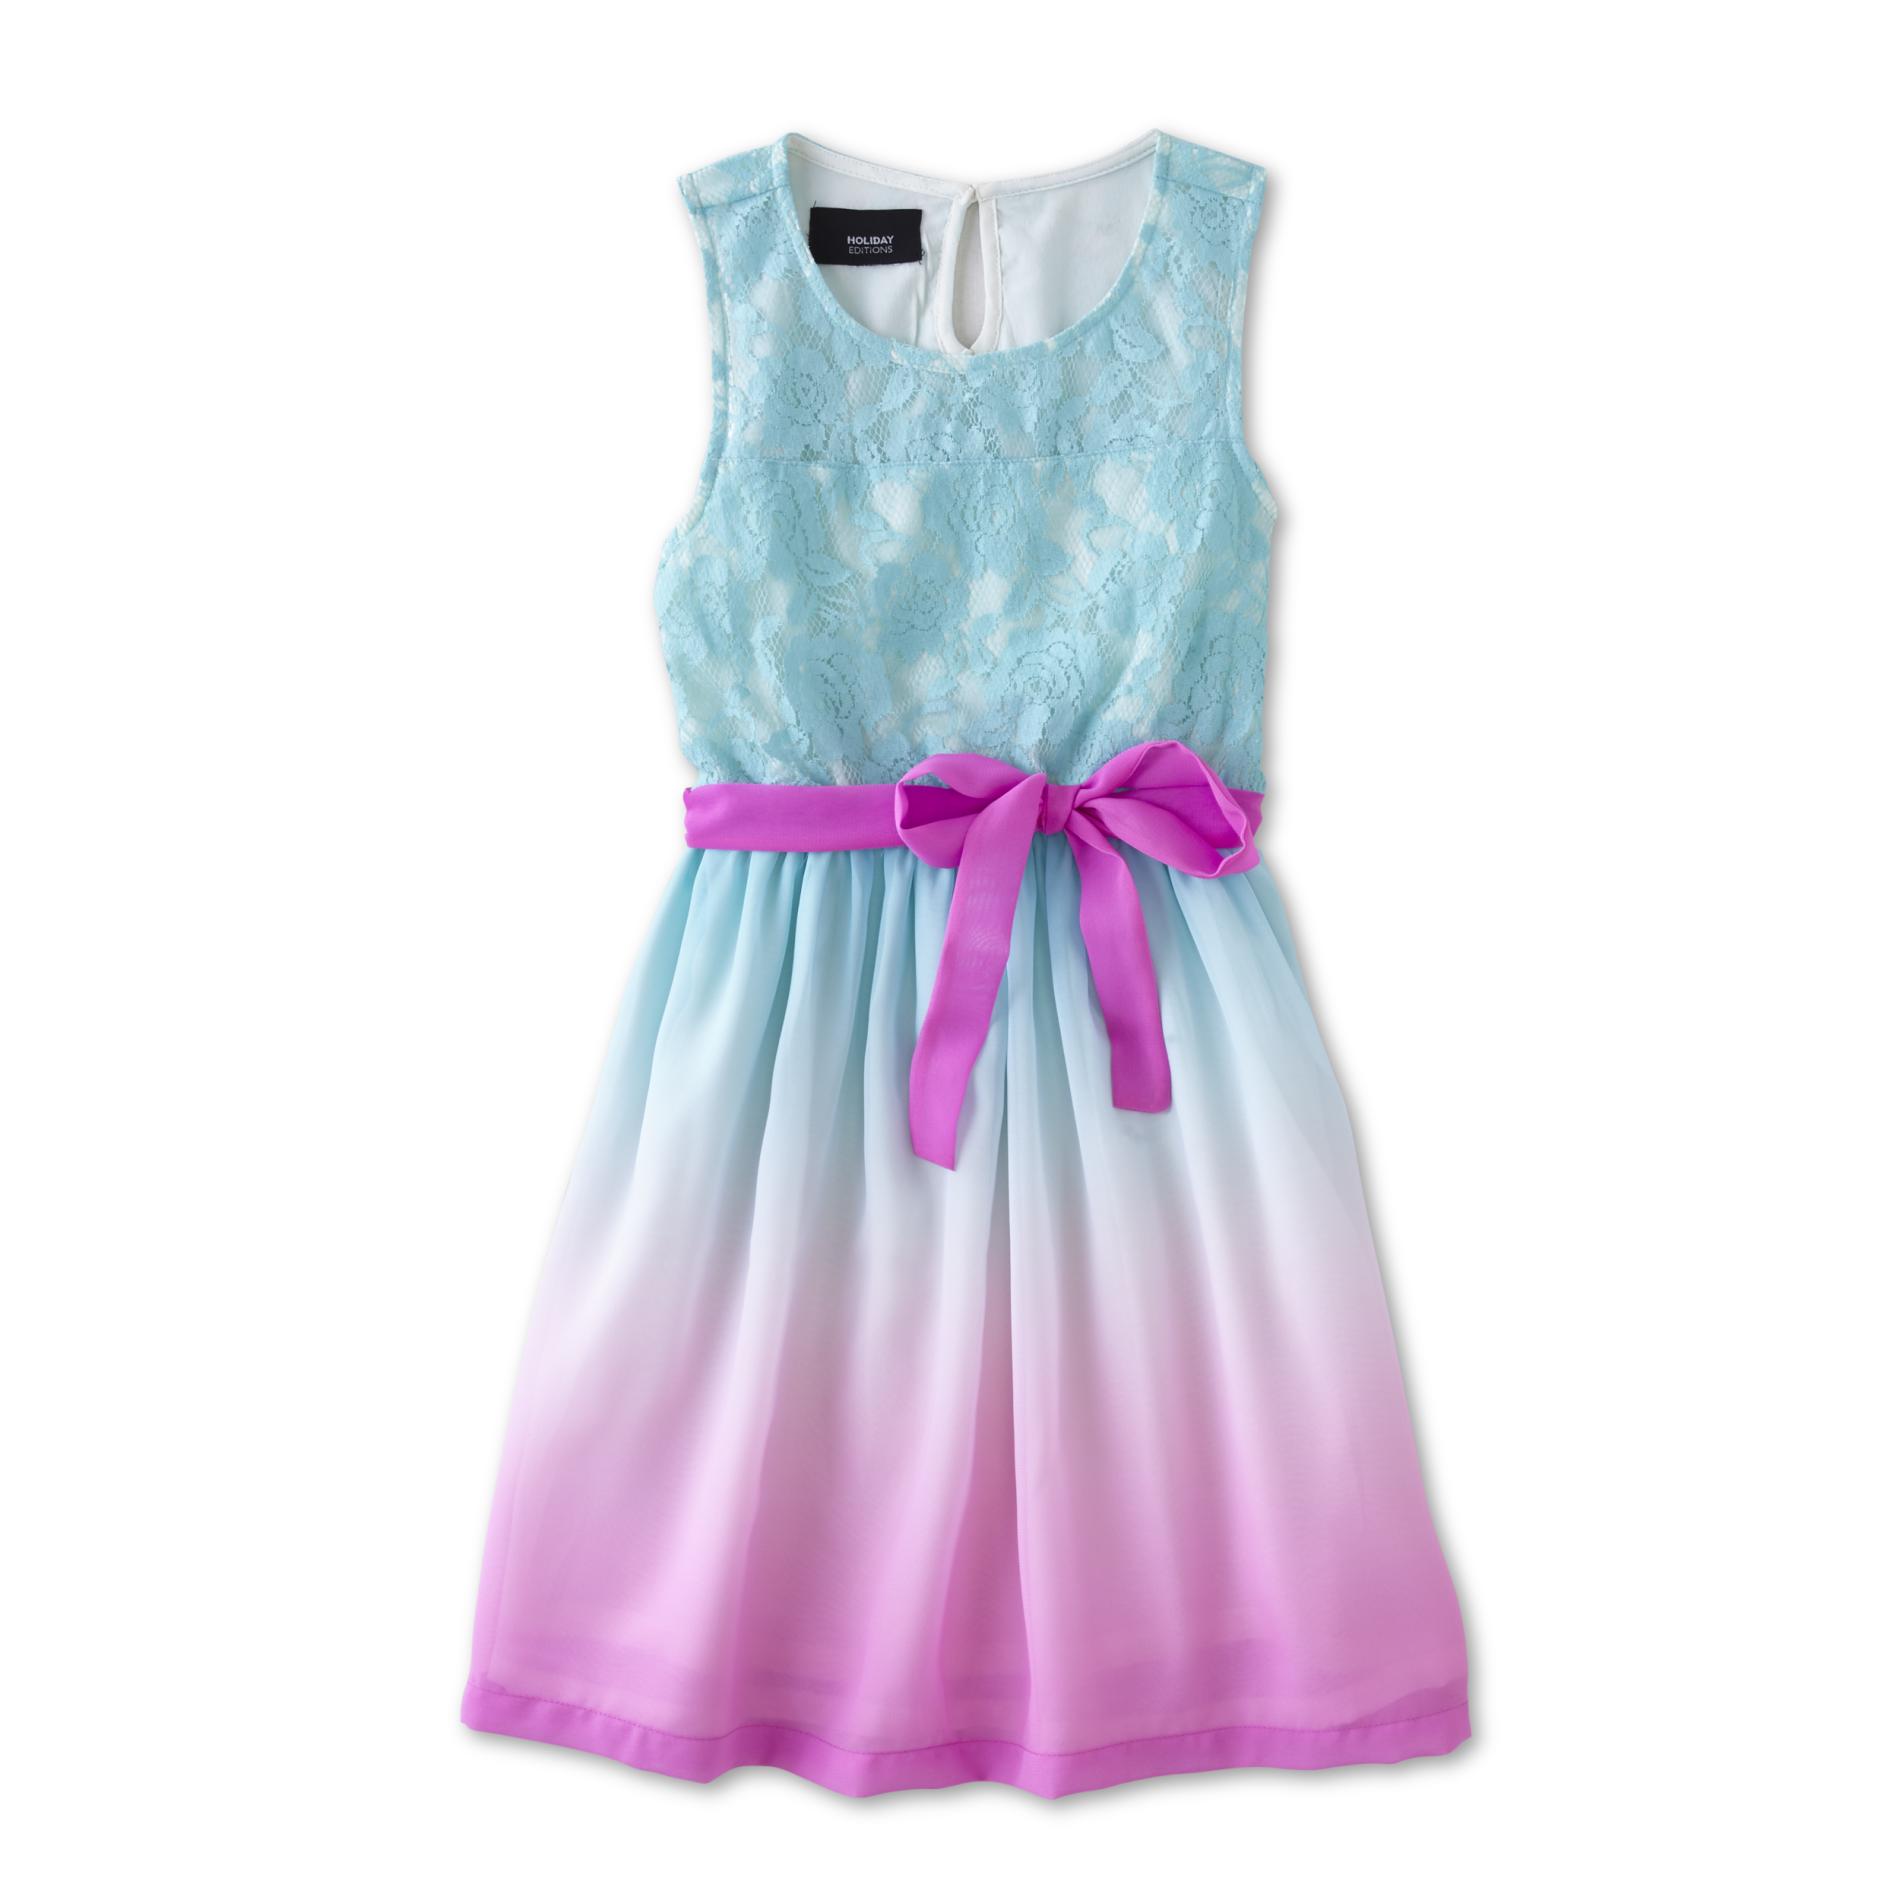 Holiday Editions Girls' Sleeveless Party Dress